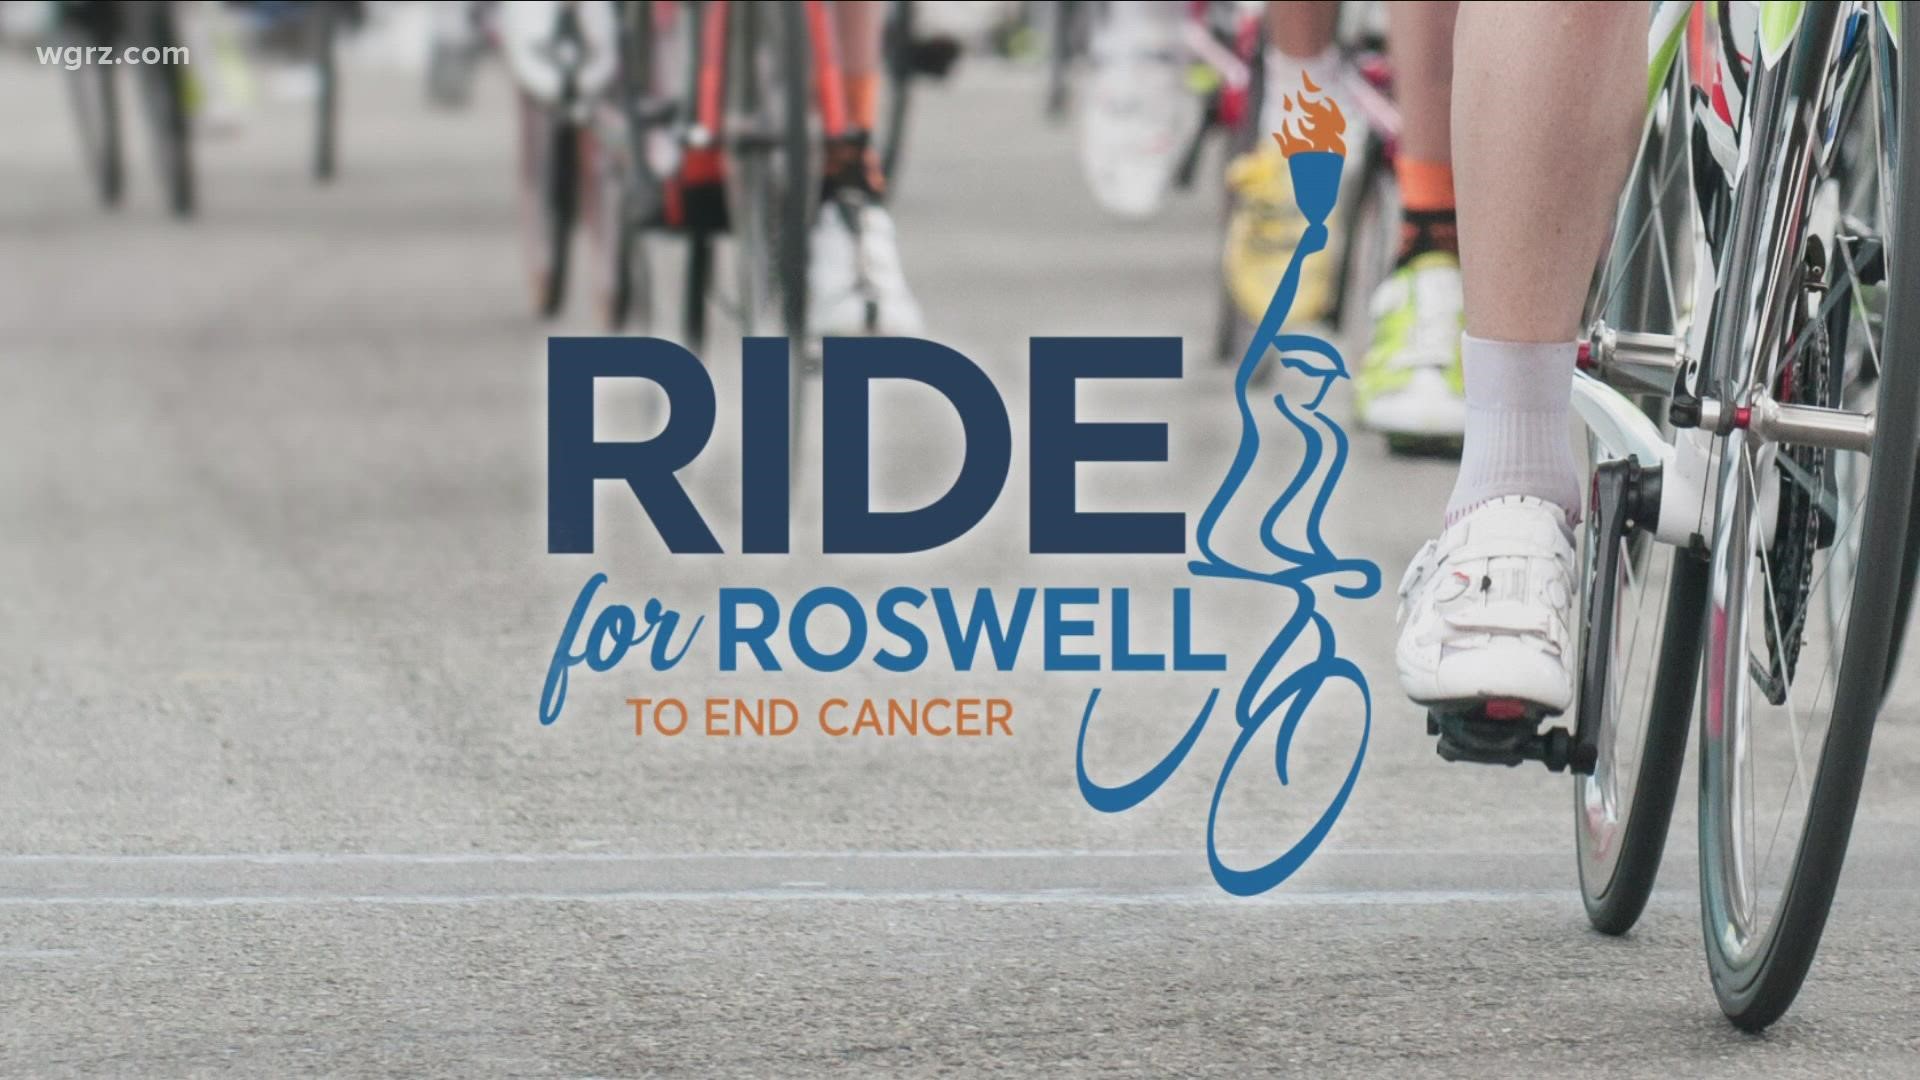 The annual event helps raise money for the Roswell Park Comprehensive Cancer Center with the hope of curing cancer.